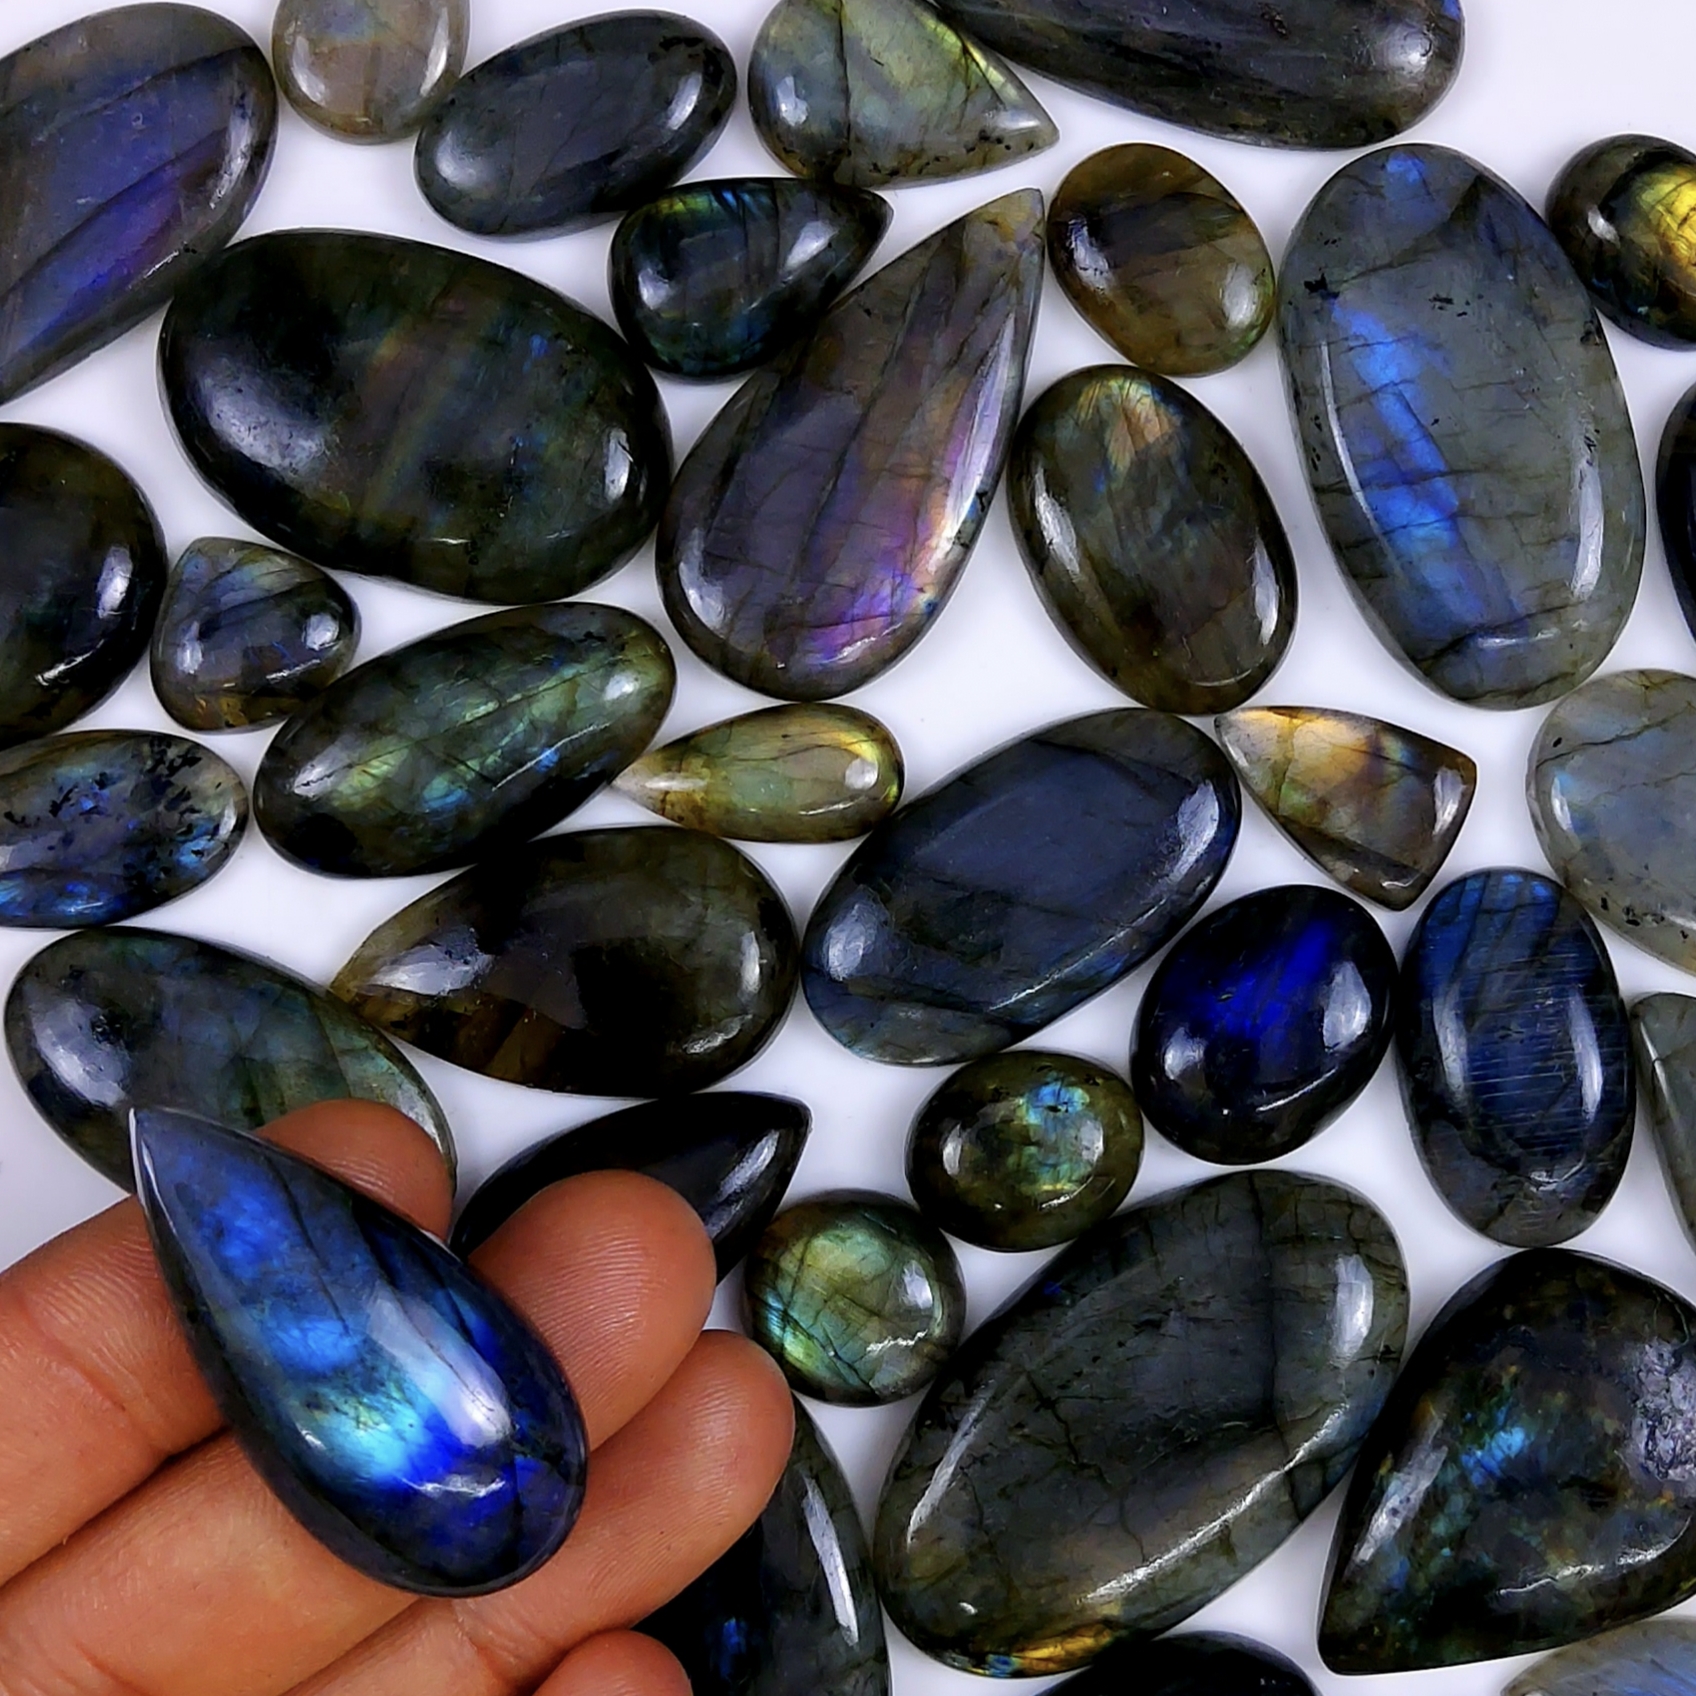 43pc 1522Cts Labradorite Cabochon Multifire Healing Crystal For Jewelry Supplies, Labradorite Necklace Handmade Wire Wrapped Gemstone Pendant 48x30 19x16mm#6337